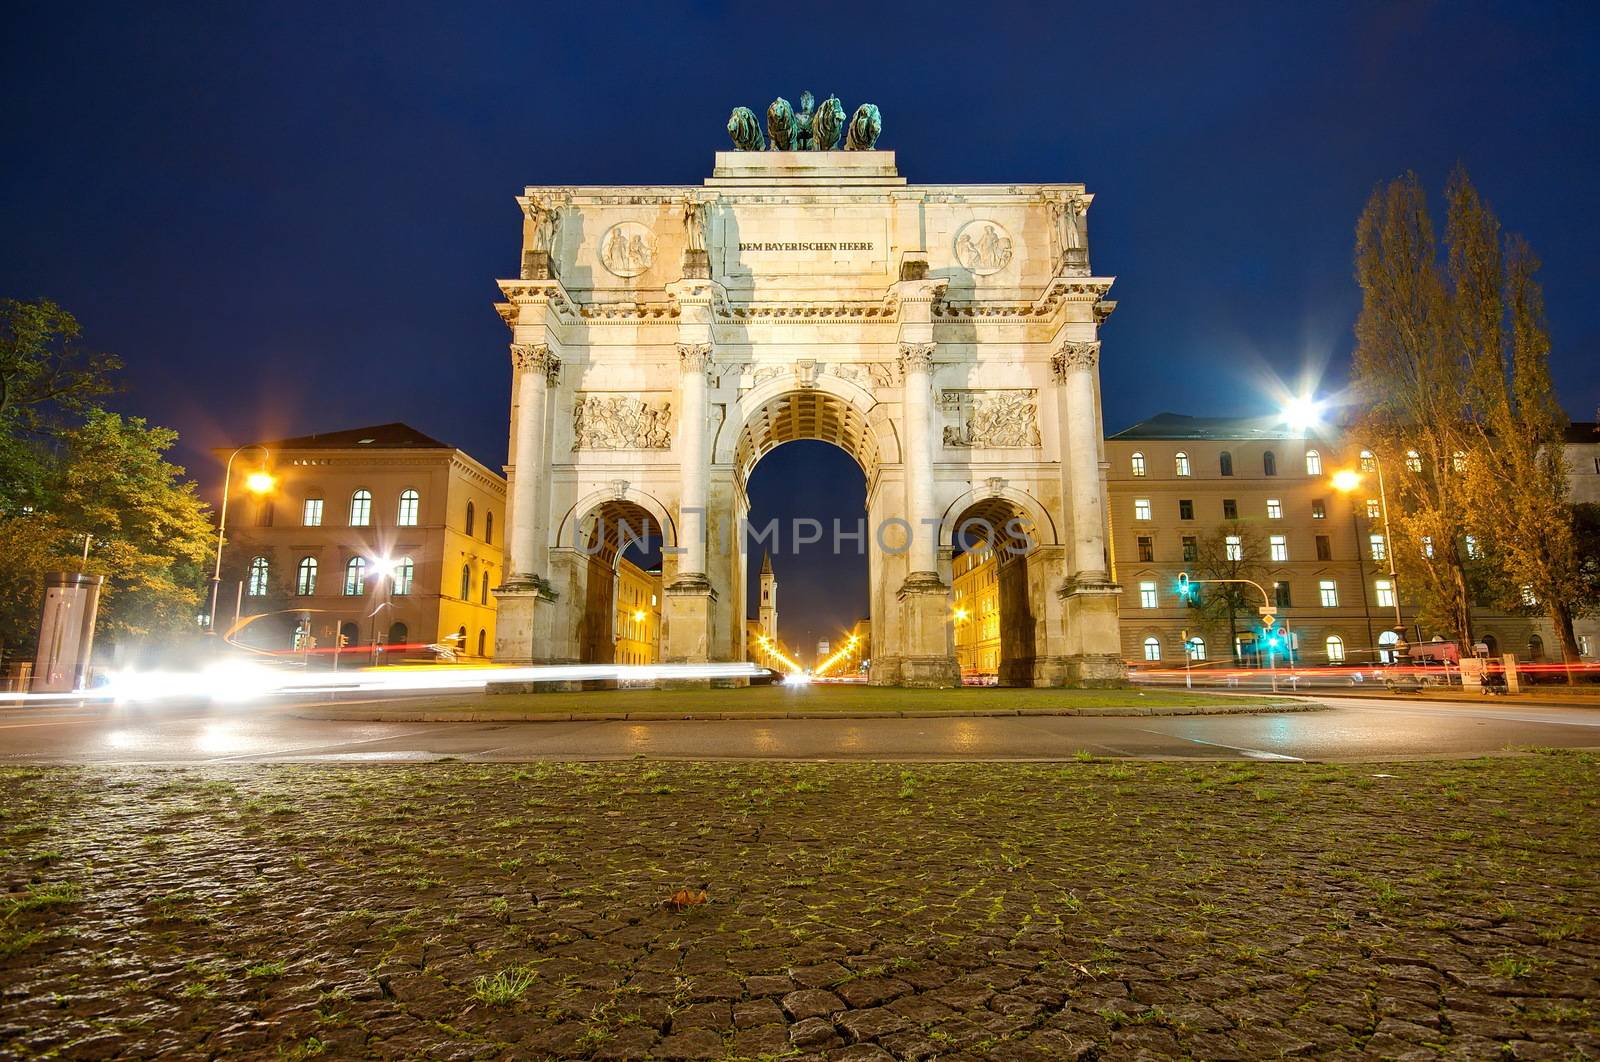 The Siegestor (Victory Gate) at night in Munich, Germany, Europe